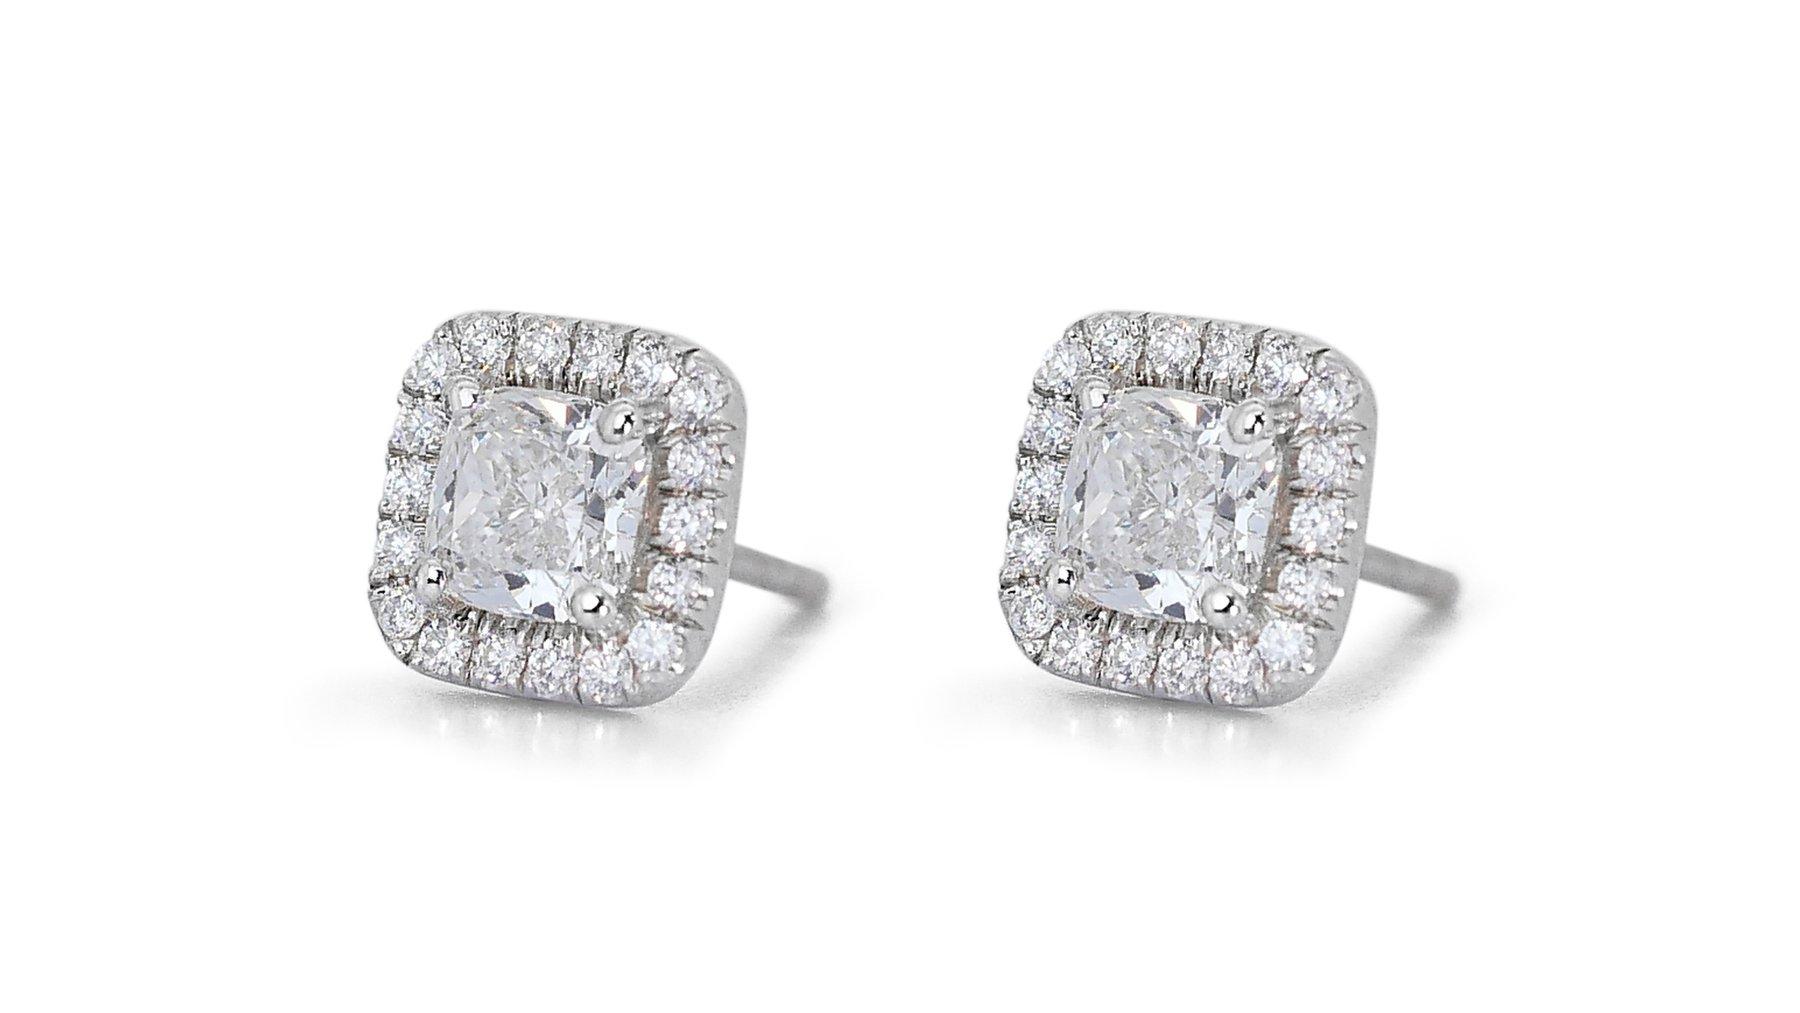 Cushion Cut Stunning 2.33ct Diamond Halo Stud Earrings in 18k White Gold - GIA Certified For Sale